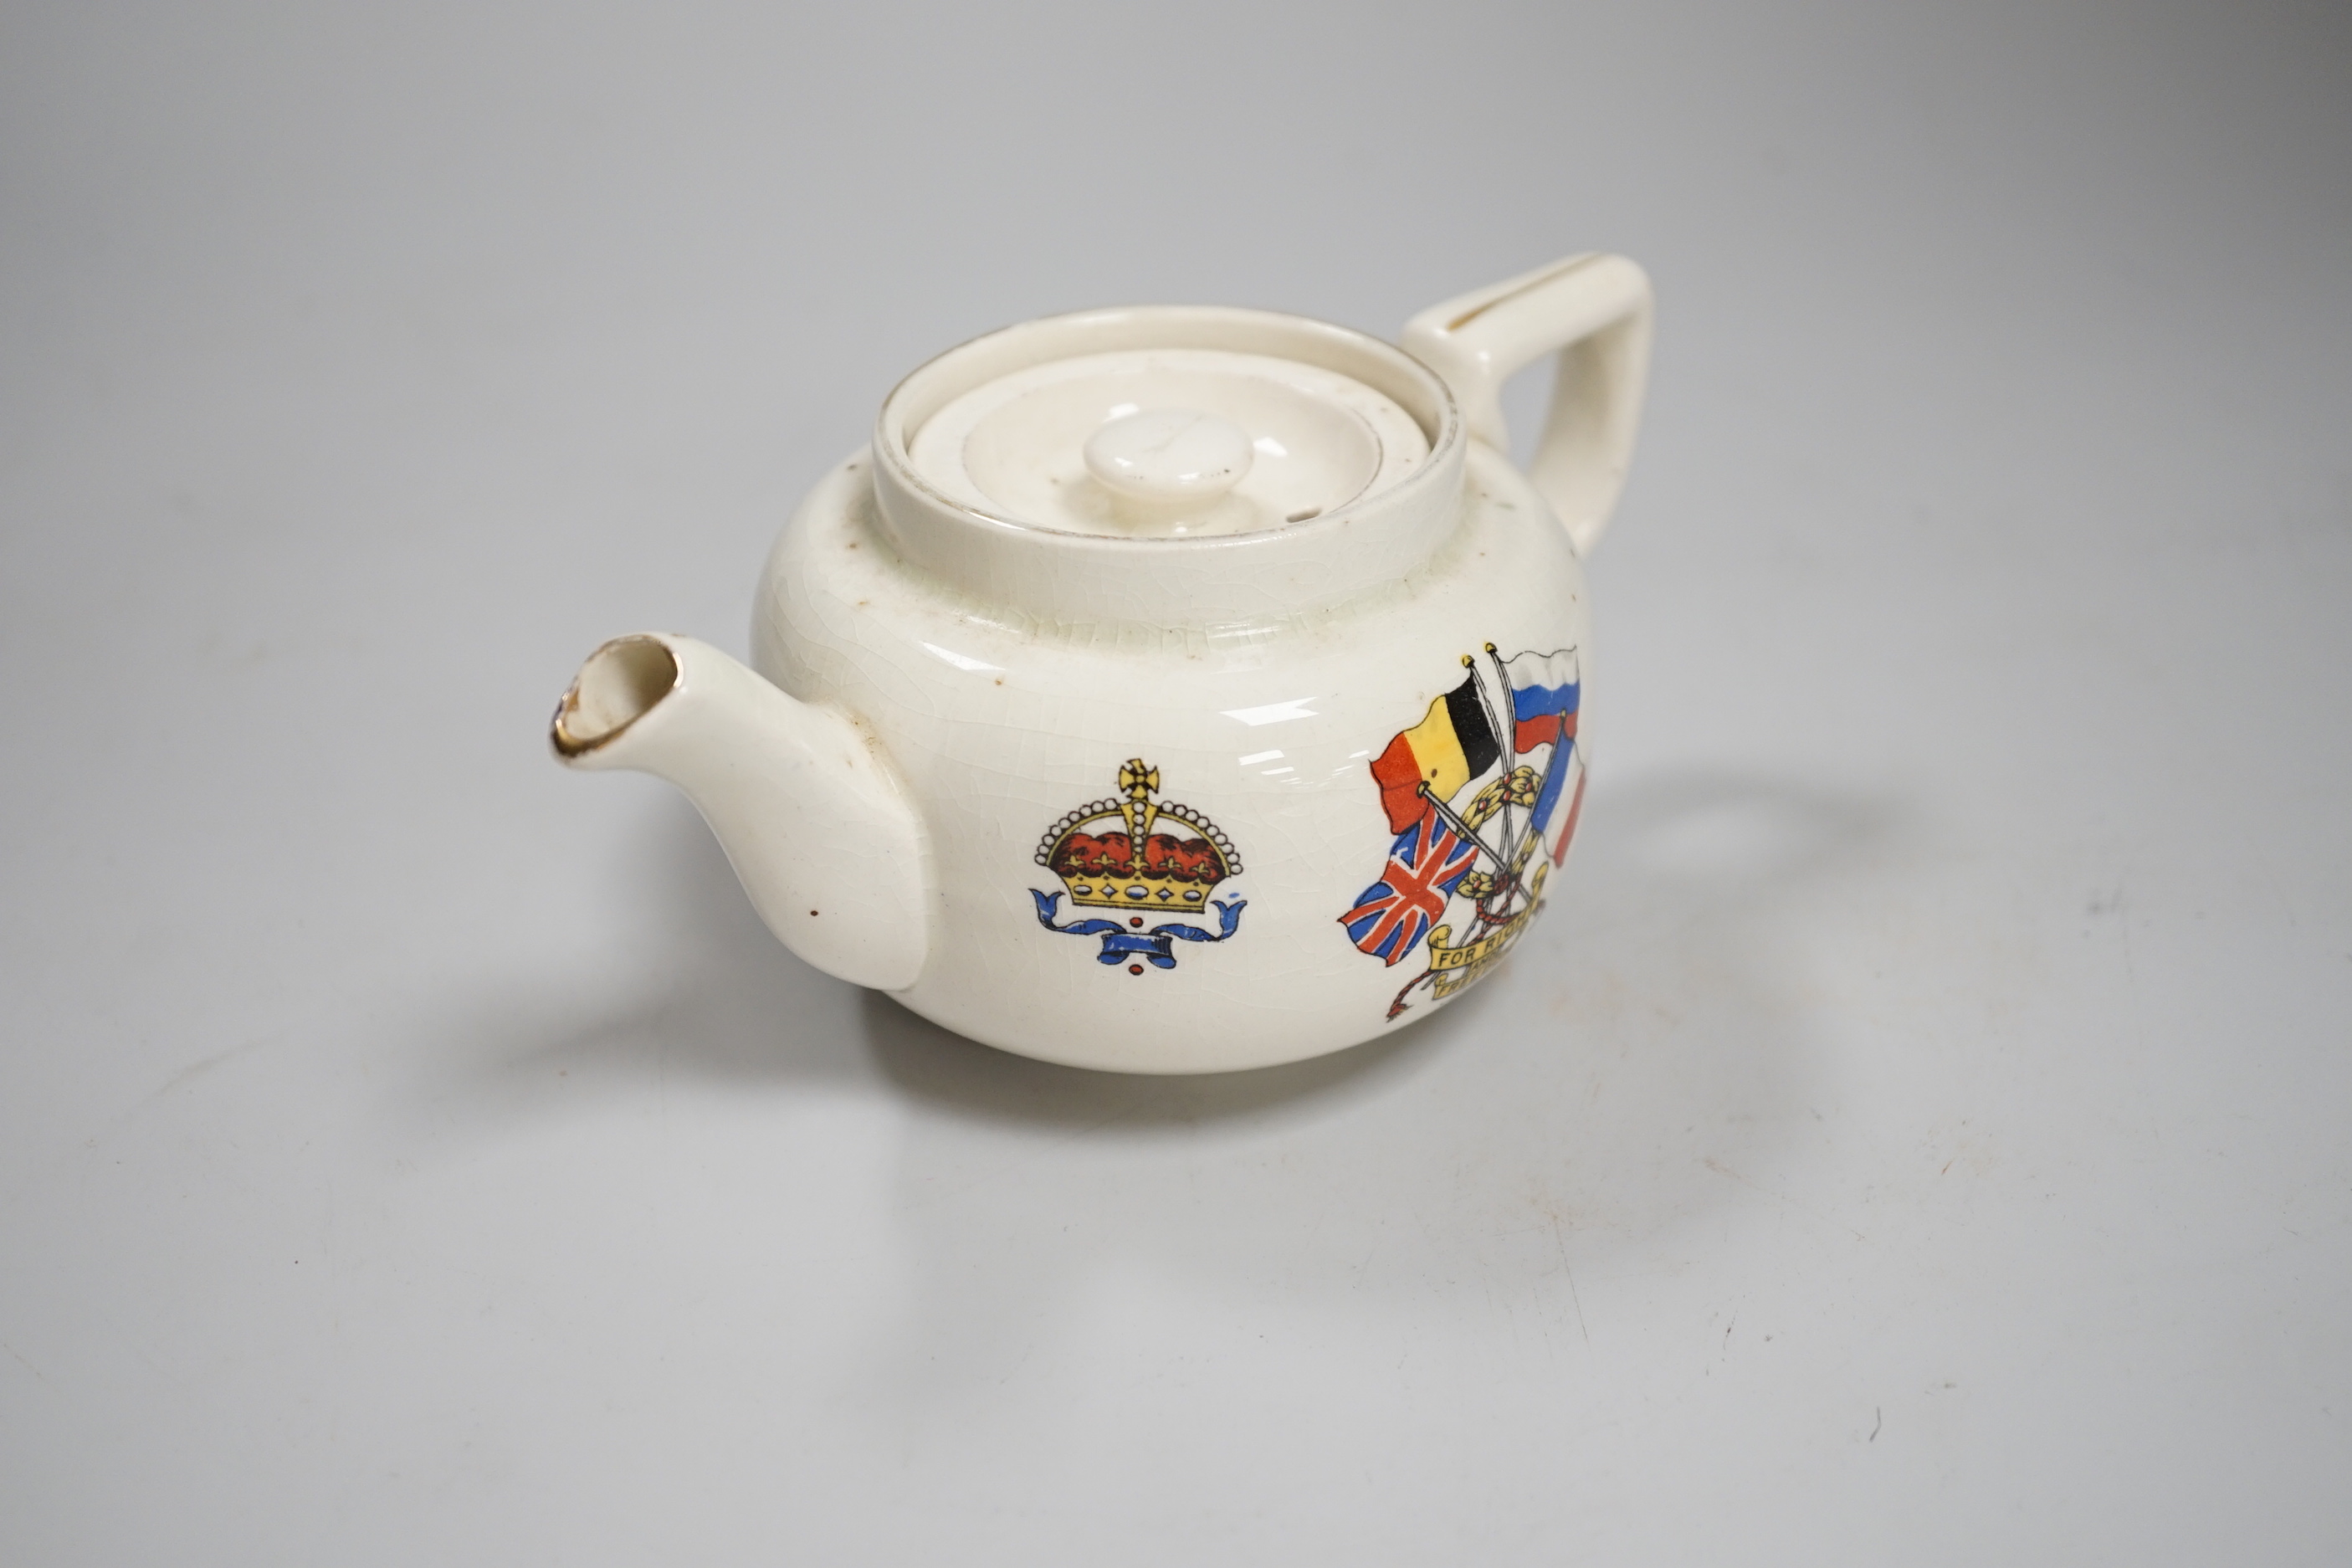 A WWI commemorative teapot with ‘For Right and Freedom’ motto and allied flags, 16cm wide